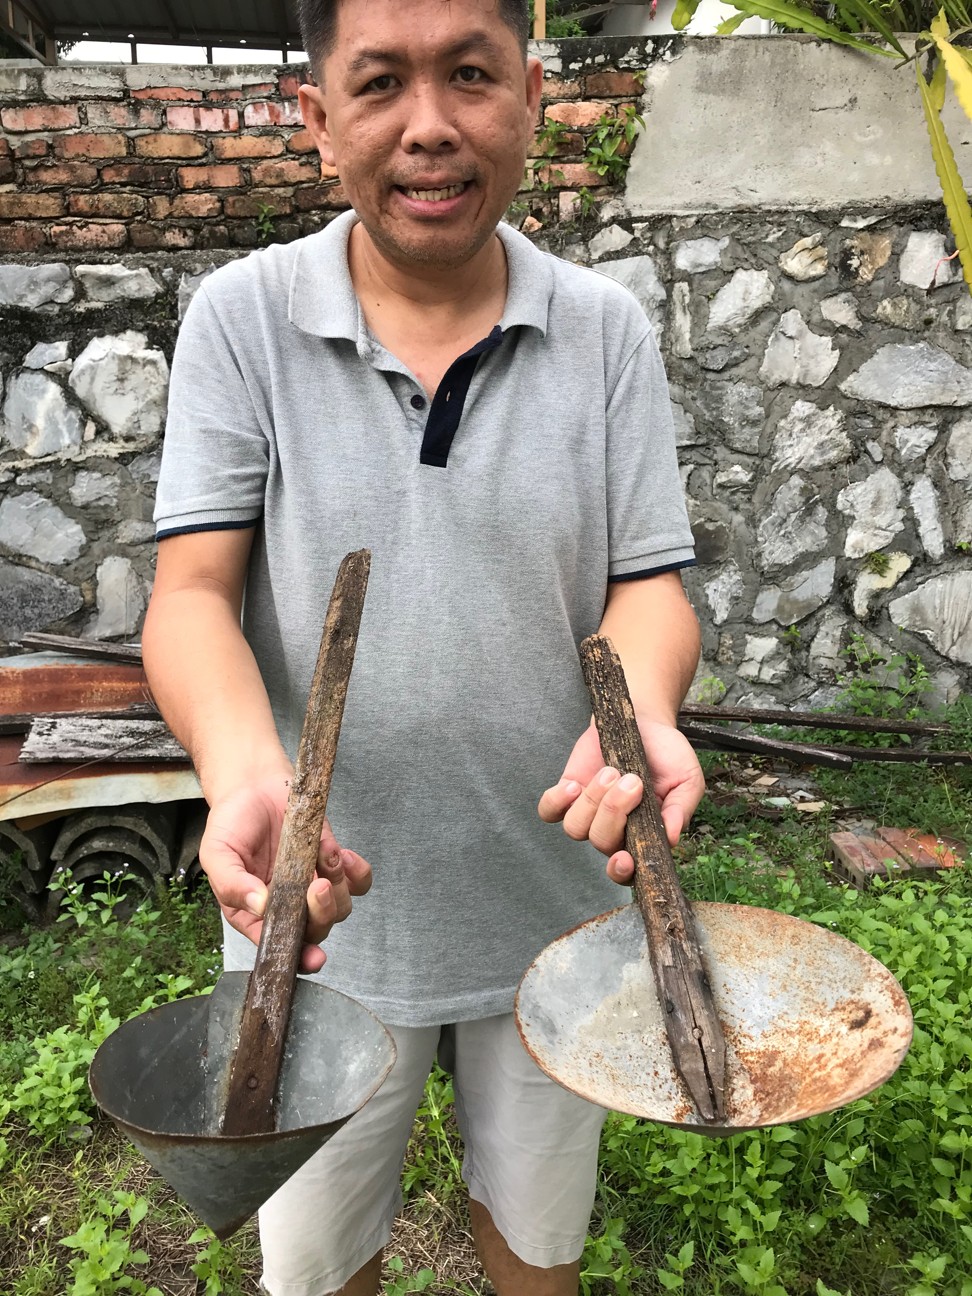 A villager in Kampung Cempaka shows tools that have been passed down in his family for generations. Photo: Project Community Kampung Cempaka